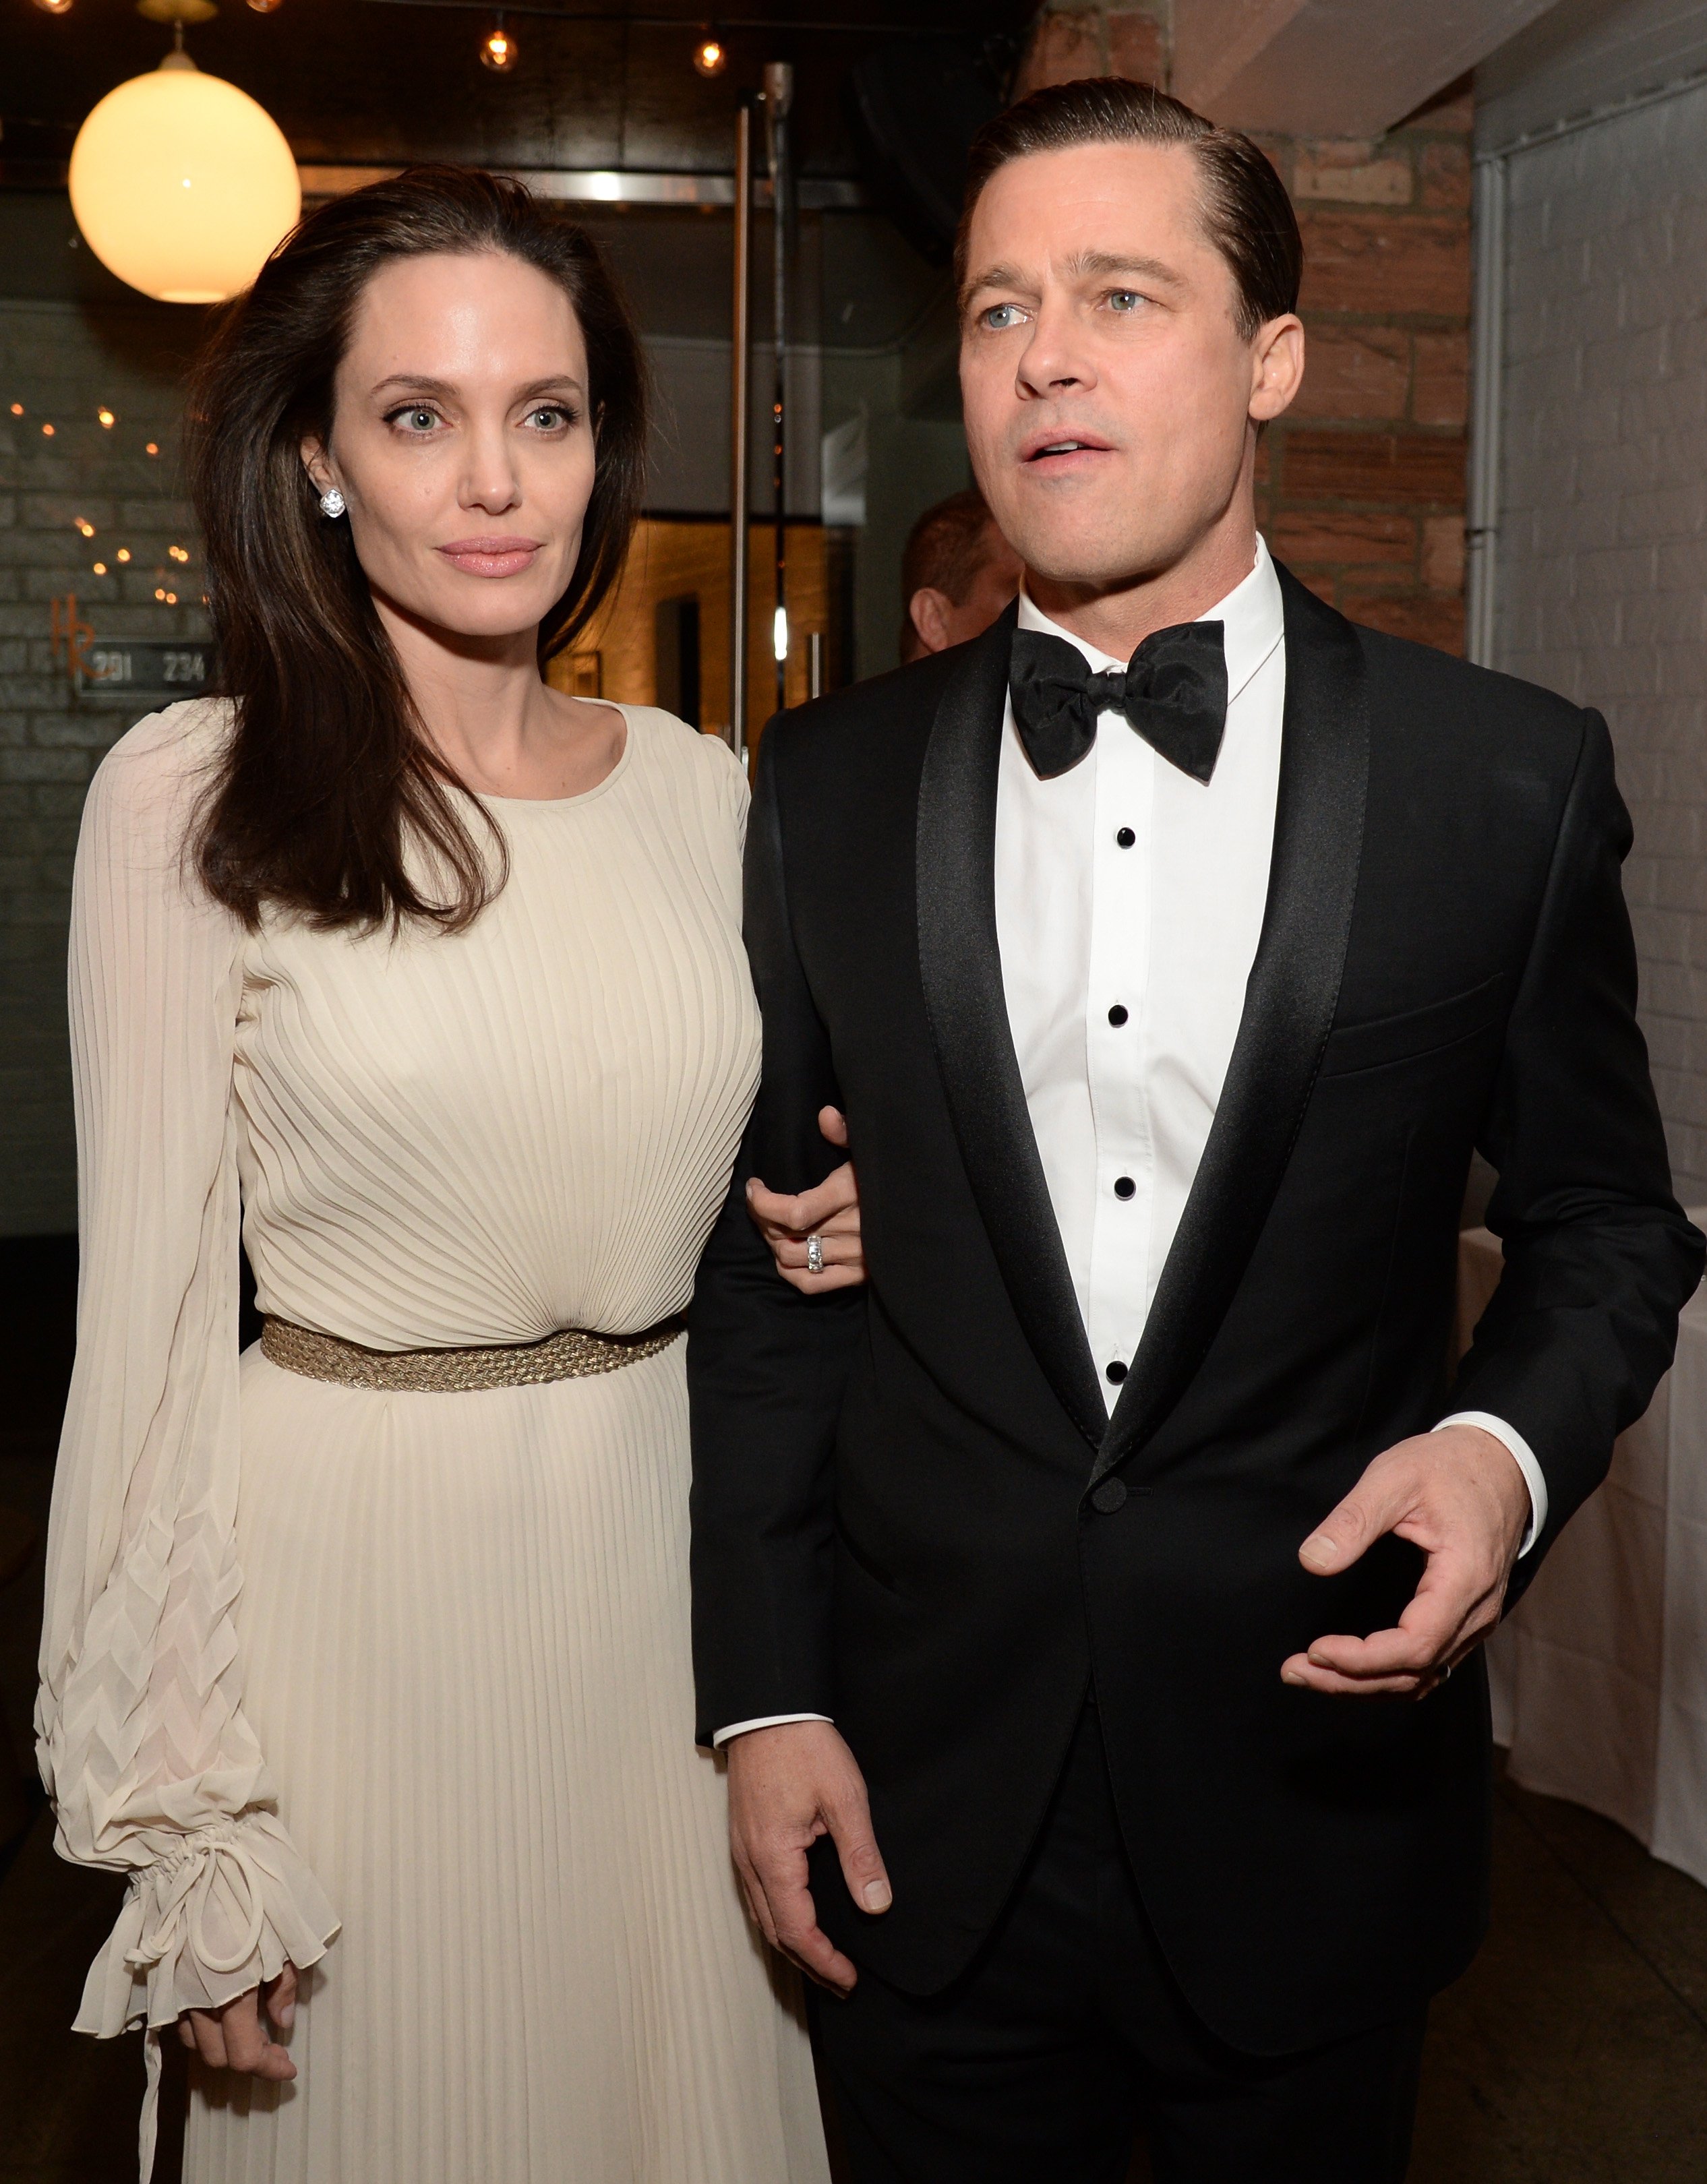 Angelina Jolie Pitt (L) and actor-producer Brad Pitt attend the after party for the opening night gala premiere of Universal Pictures' "By the Sea" during AFI FEST 2015 presented by Audi at TCL Chinese 6 Theatres on November 5, 2015 in Hollywood, California. | Source: Getty Images